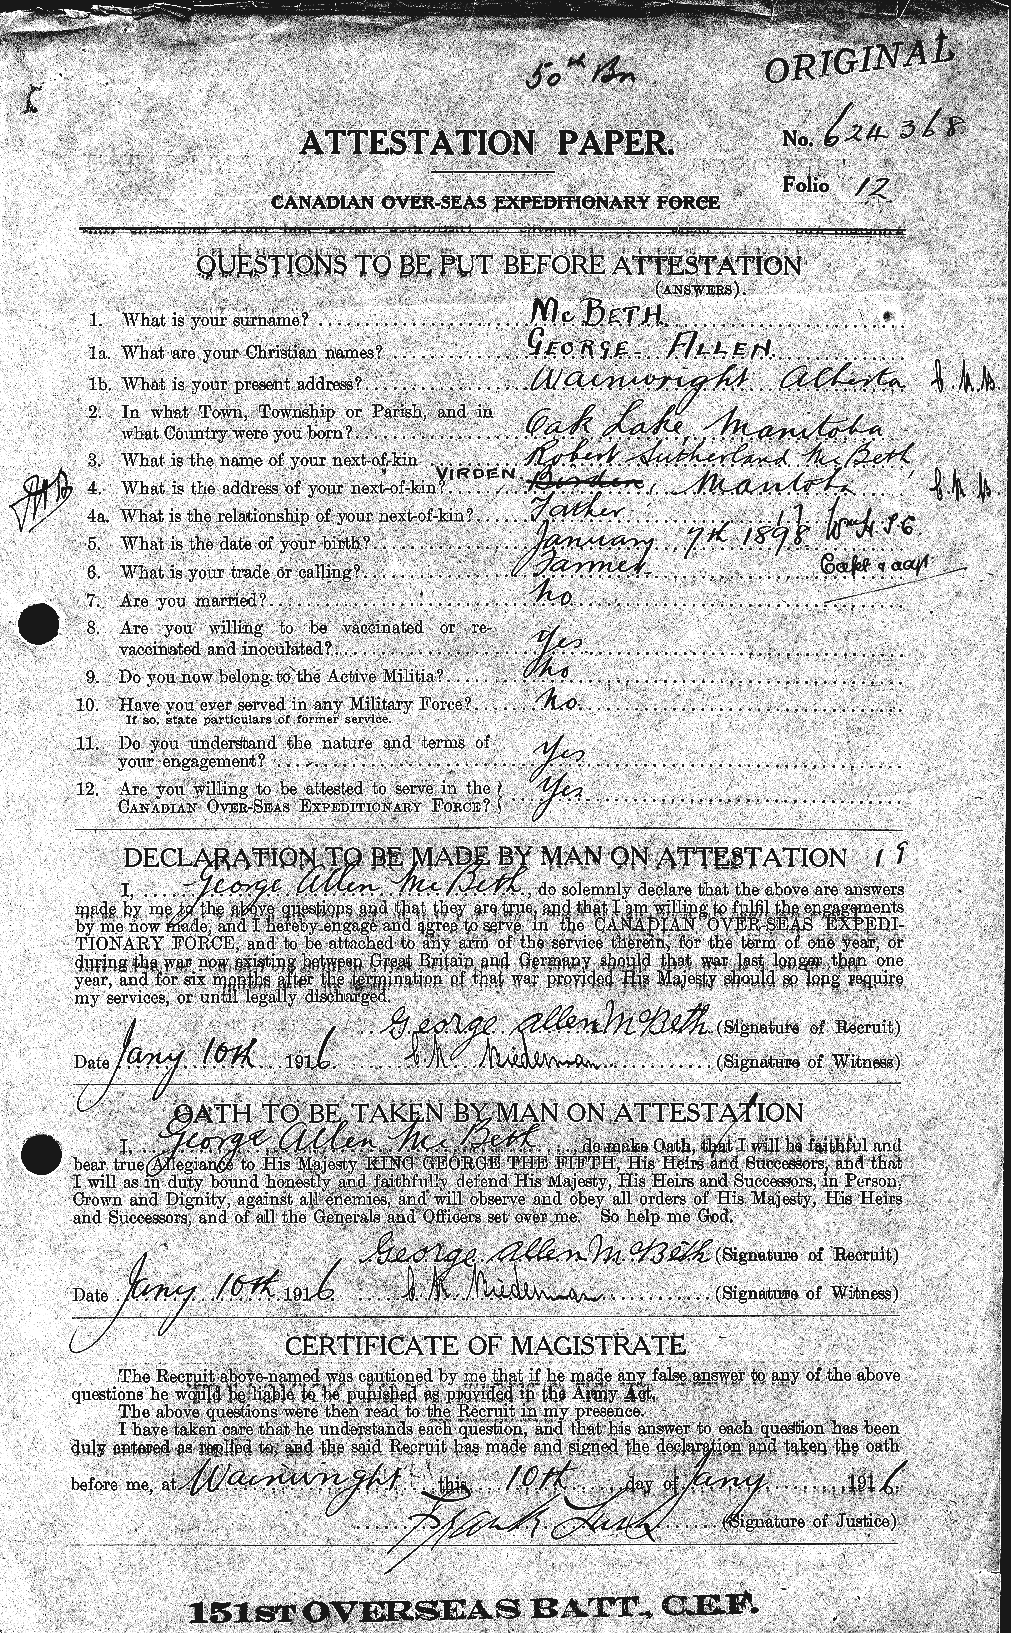 Personnel Records of the First World War - CEF 132124a